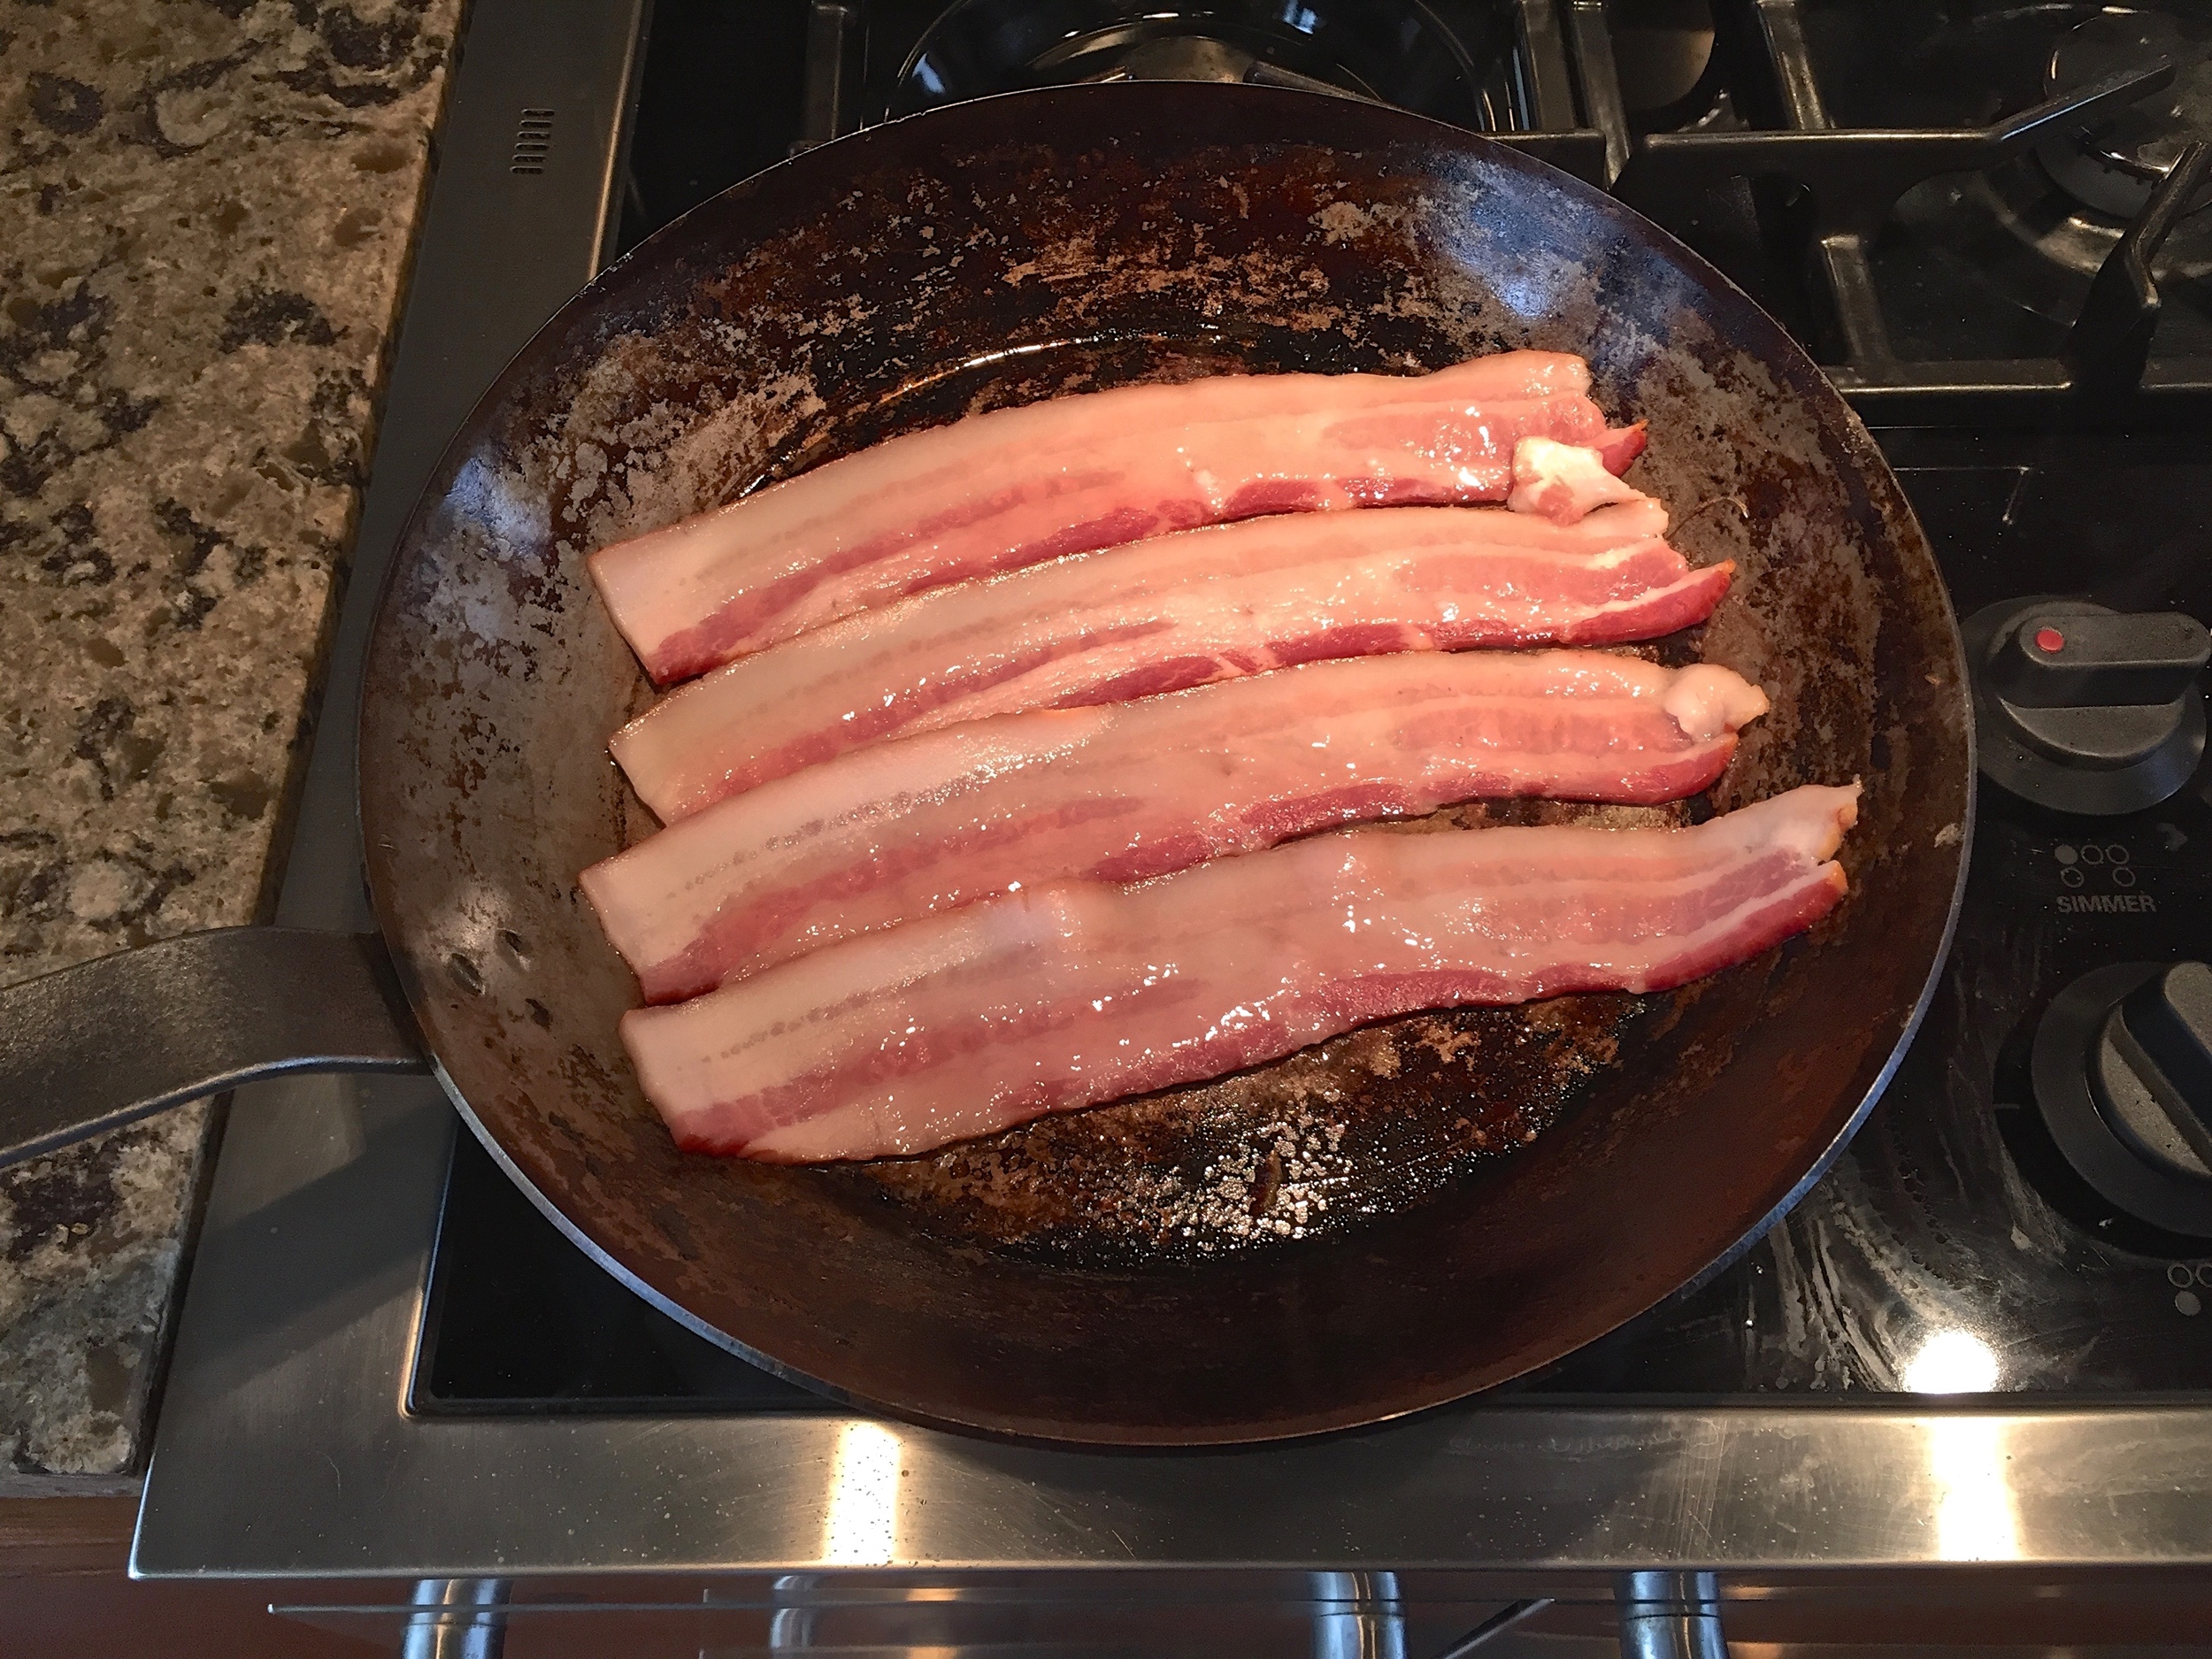 Frying bacon the traditional way